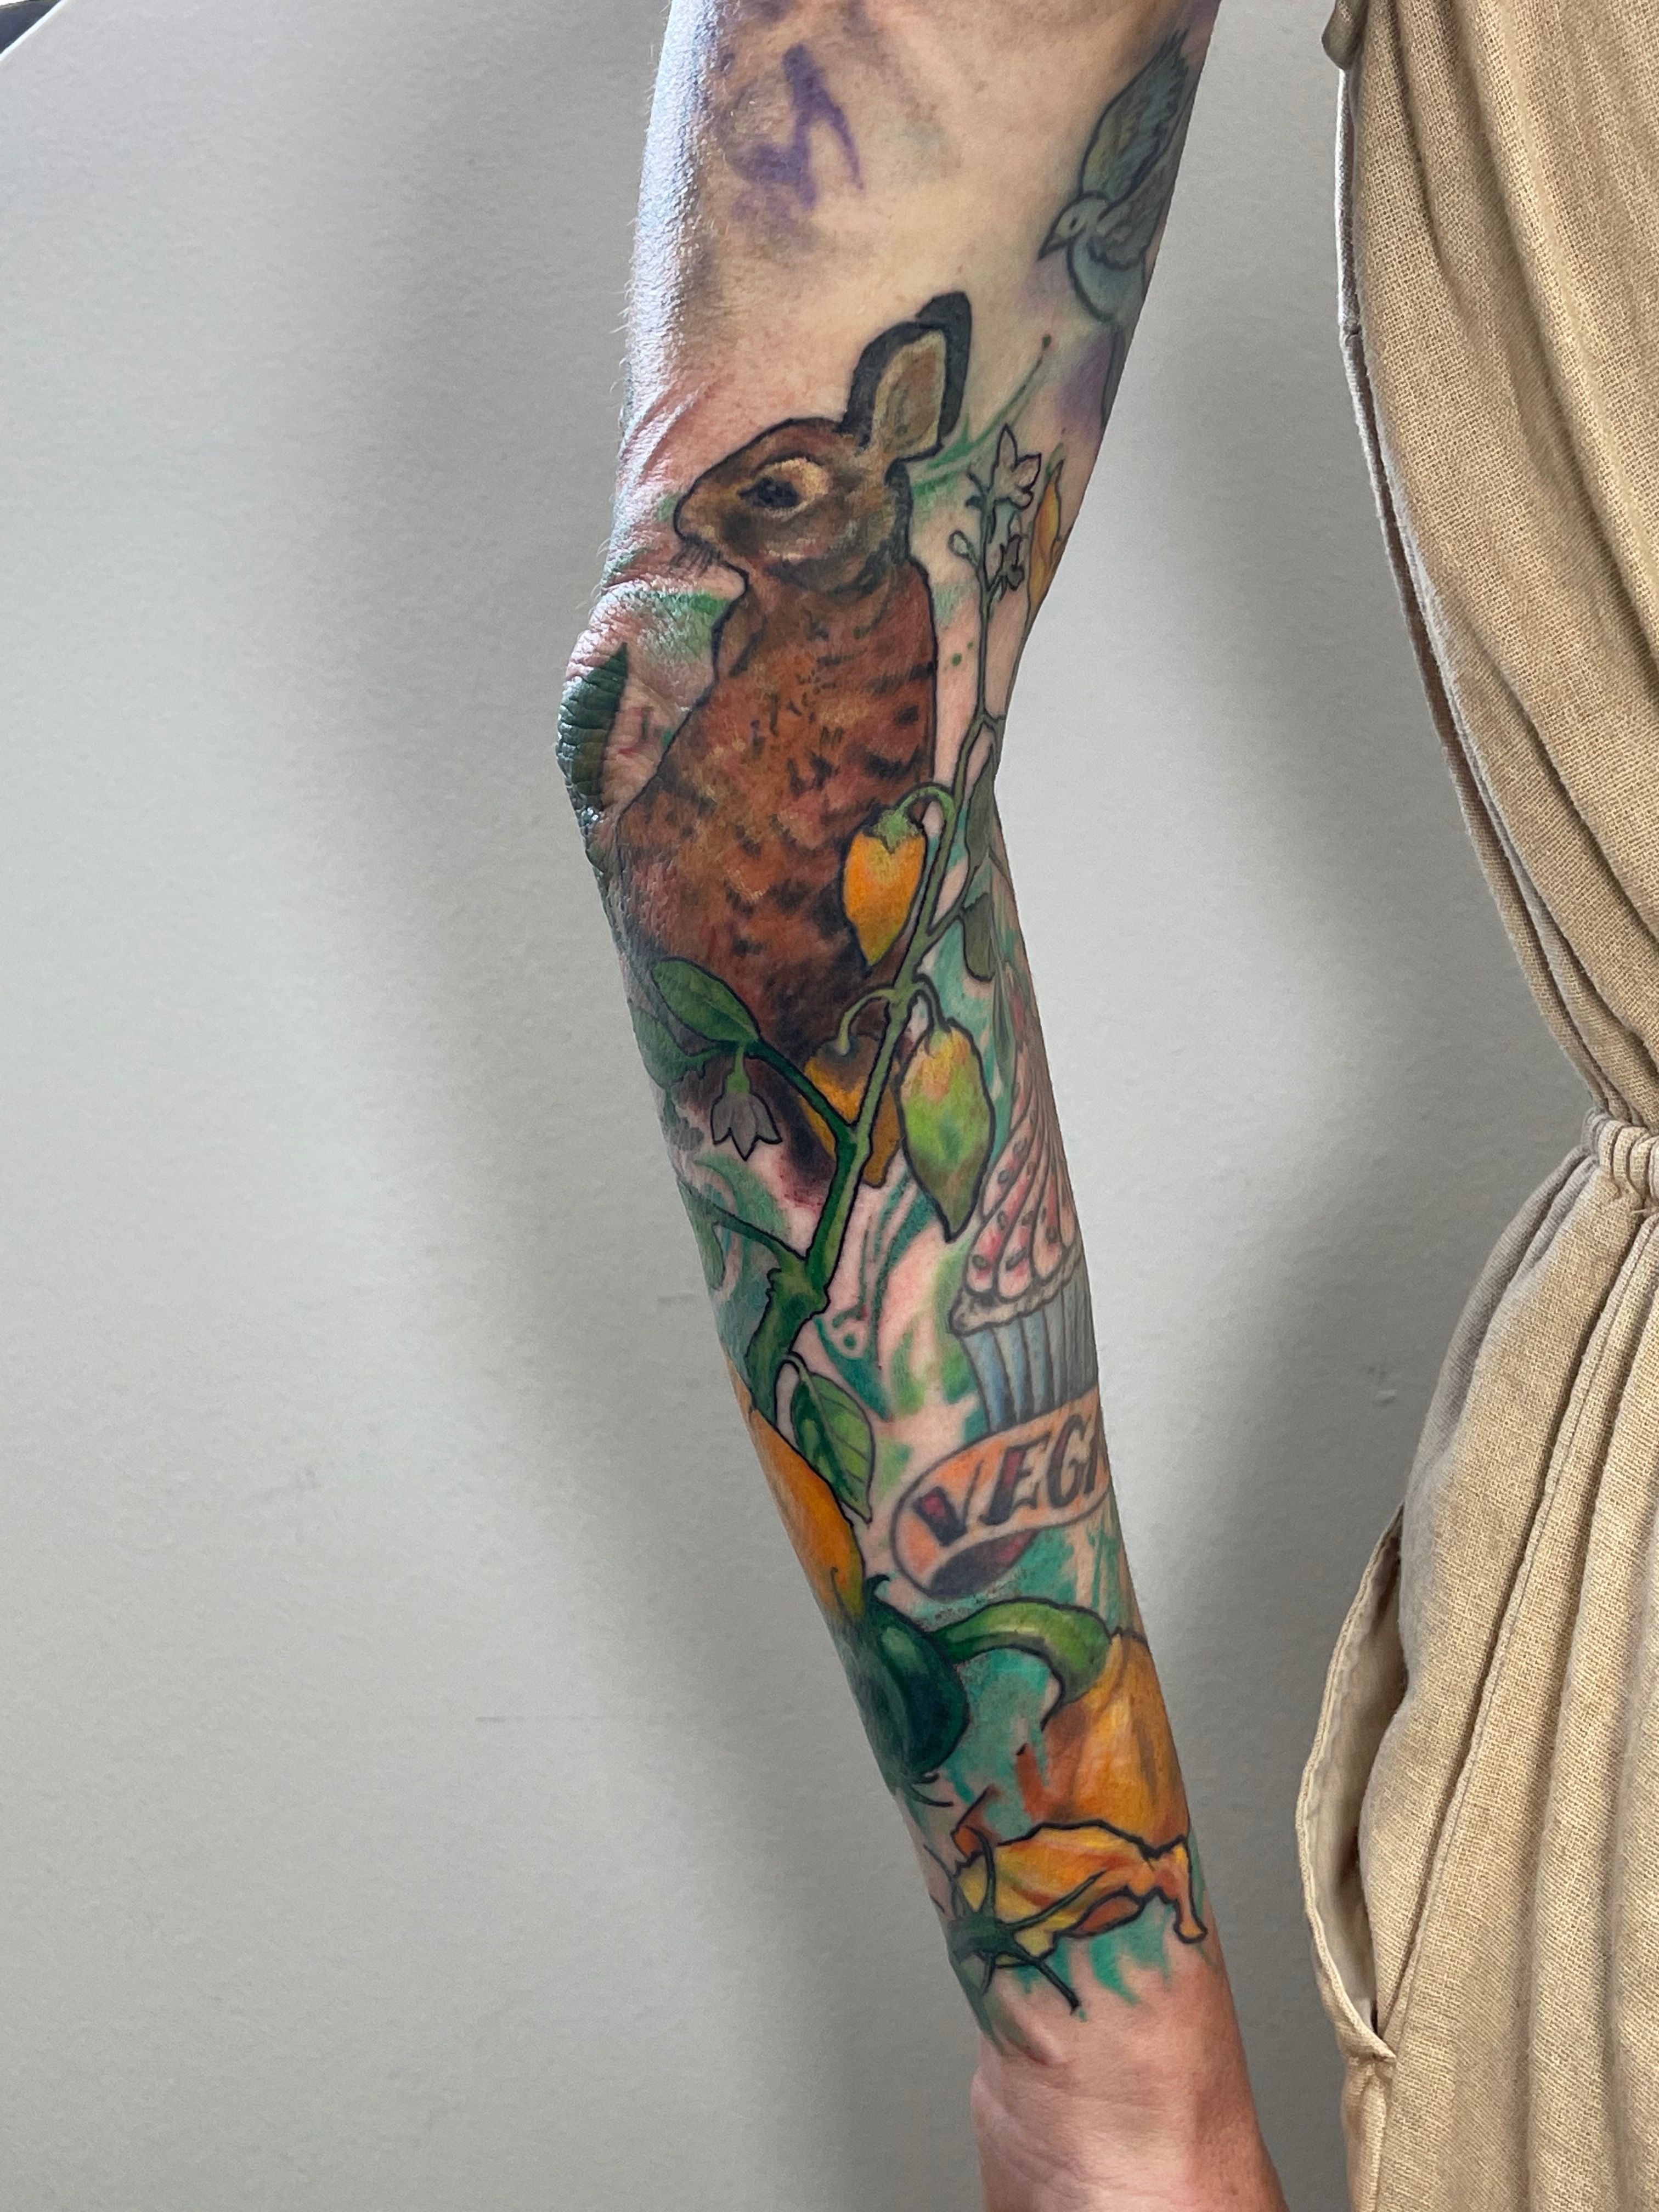 The flowers are taking shape on his arm garden #tattoo #ta… | Flickr